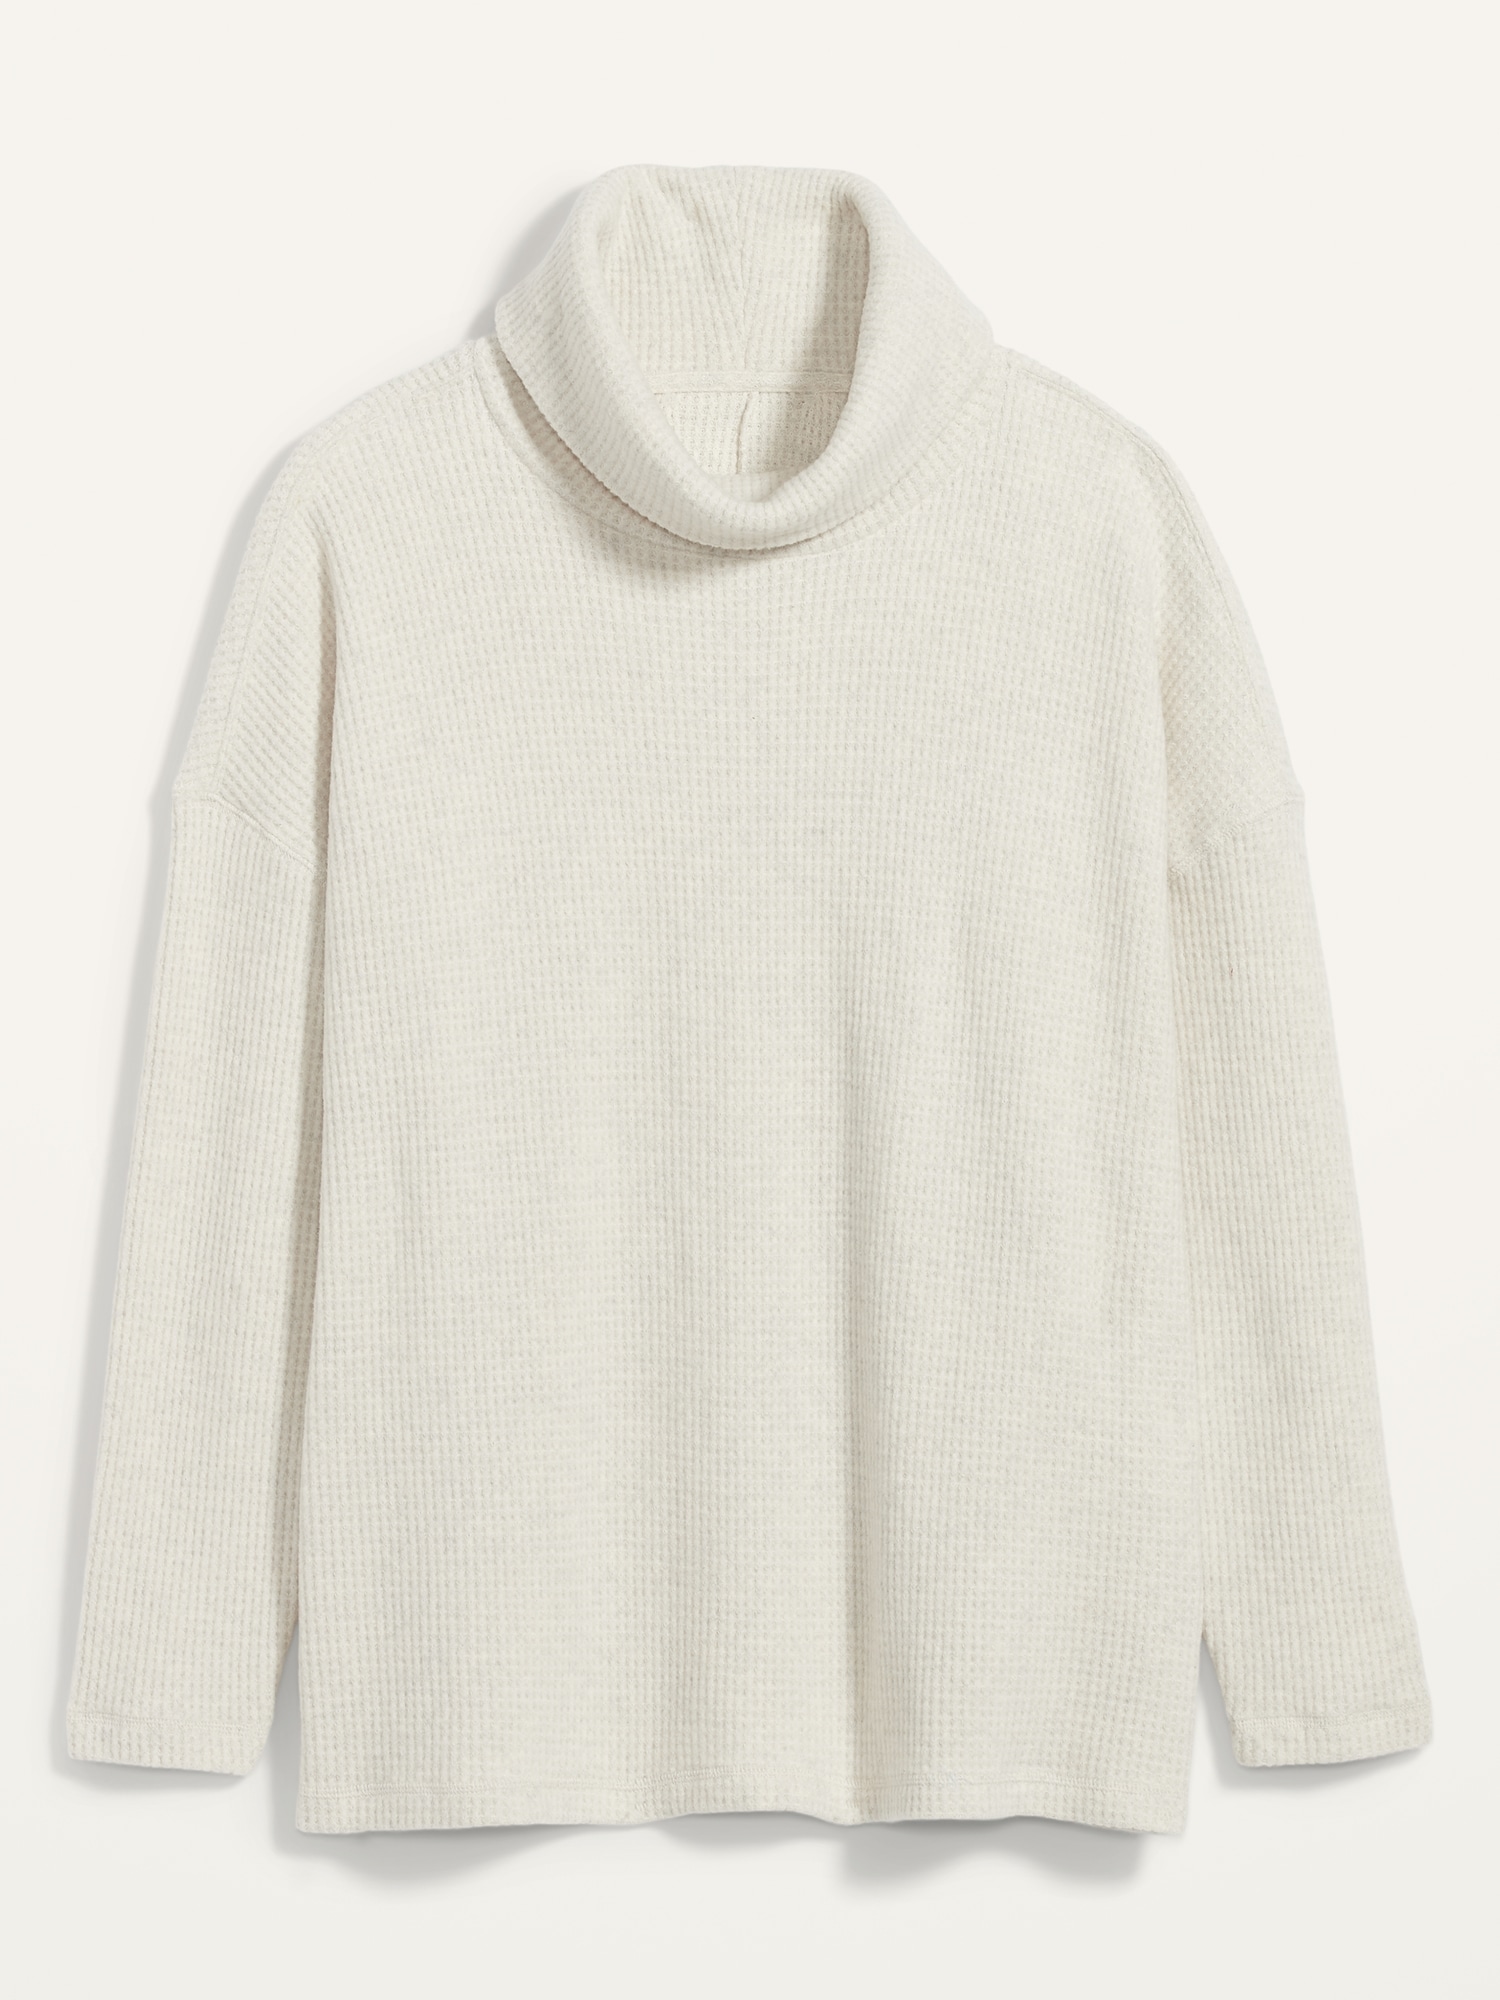 Oversized Cozy Thermal-Knit Cowl-Neck Plus-Size Long-Sleeve Top | Old Navy